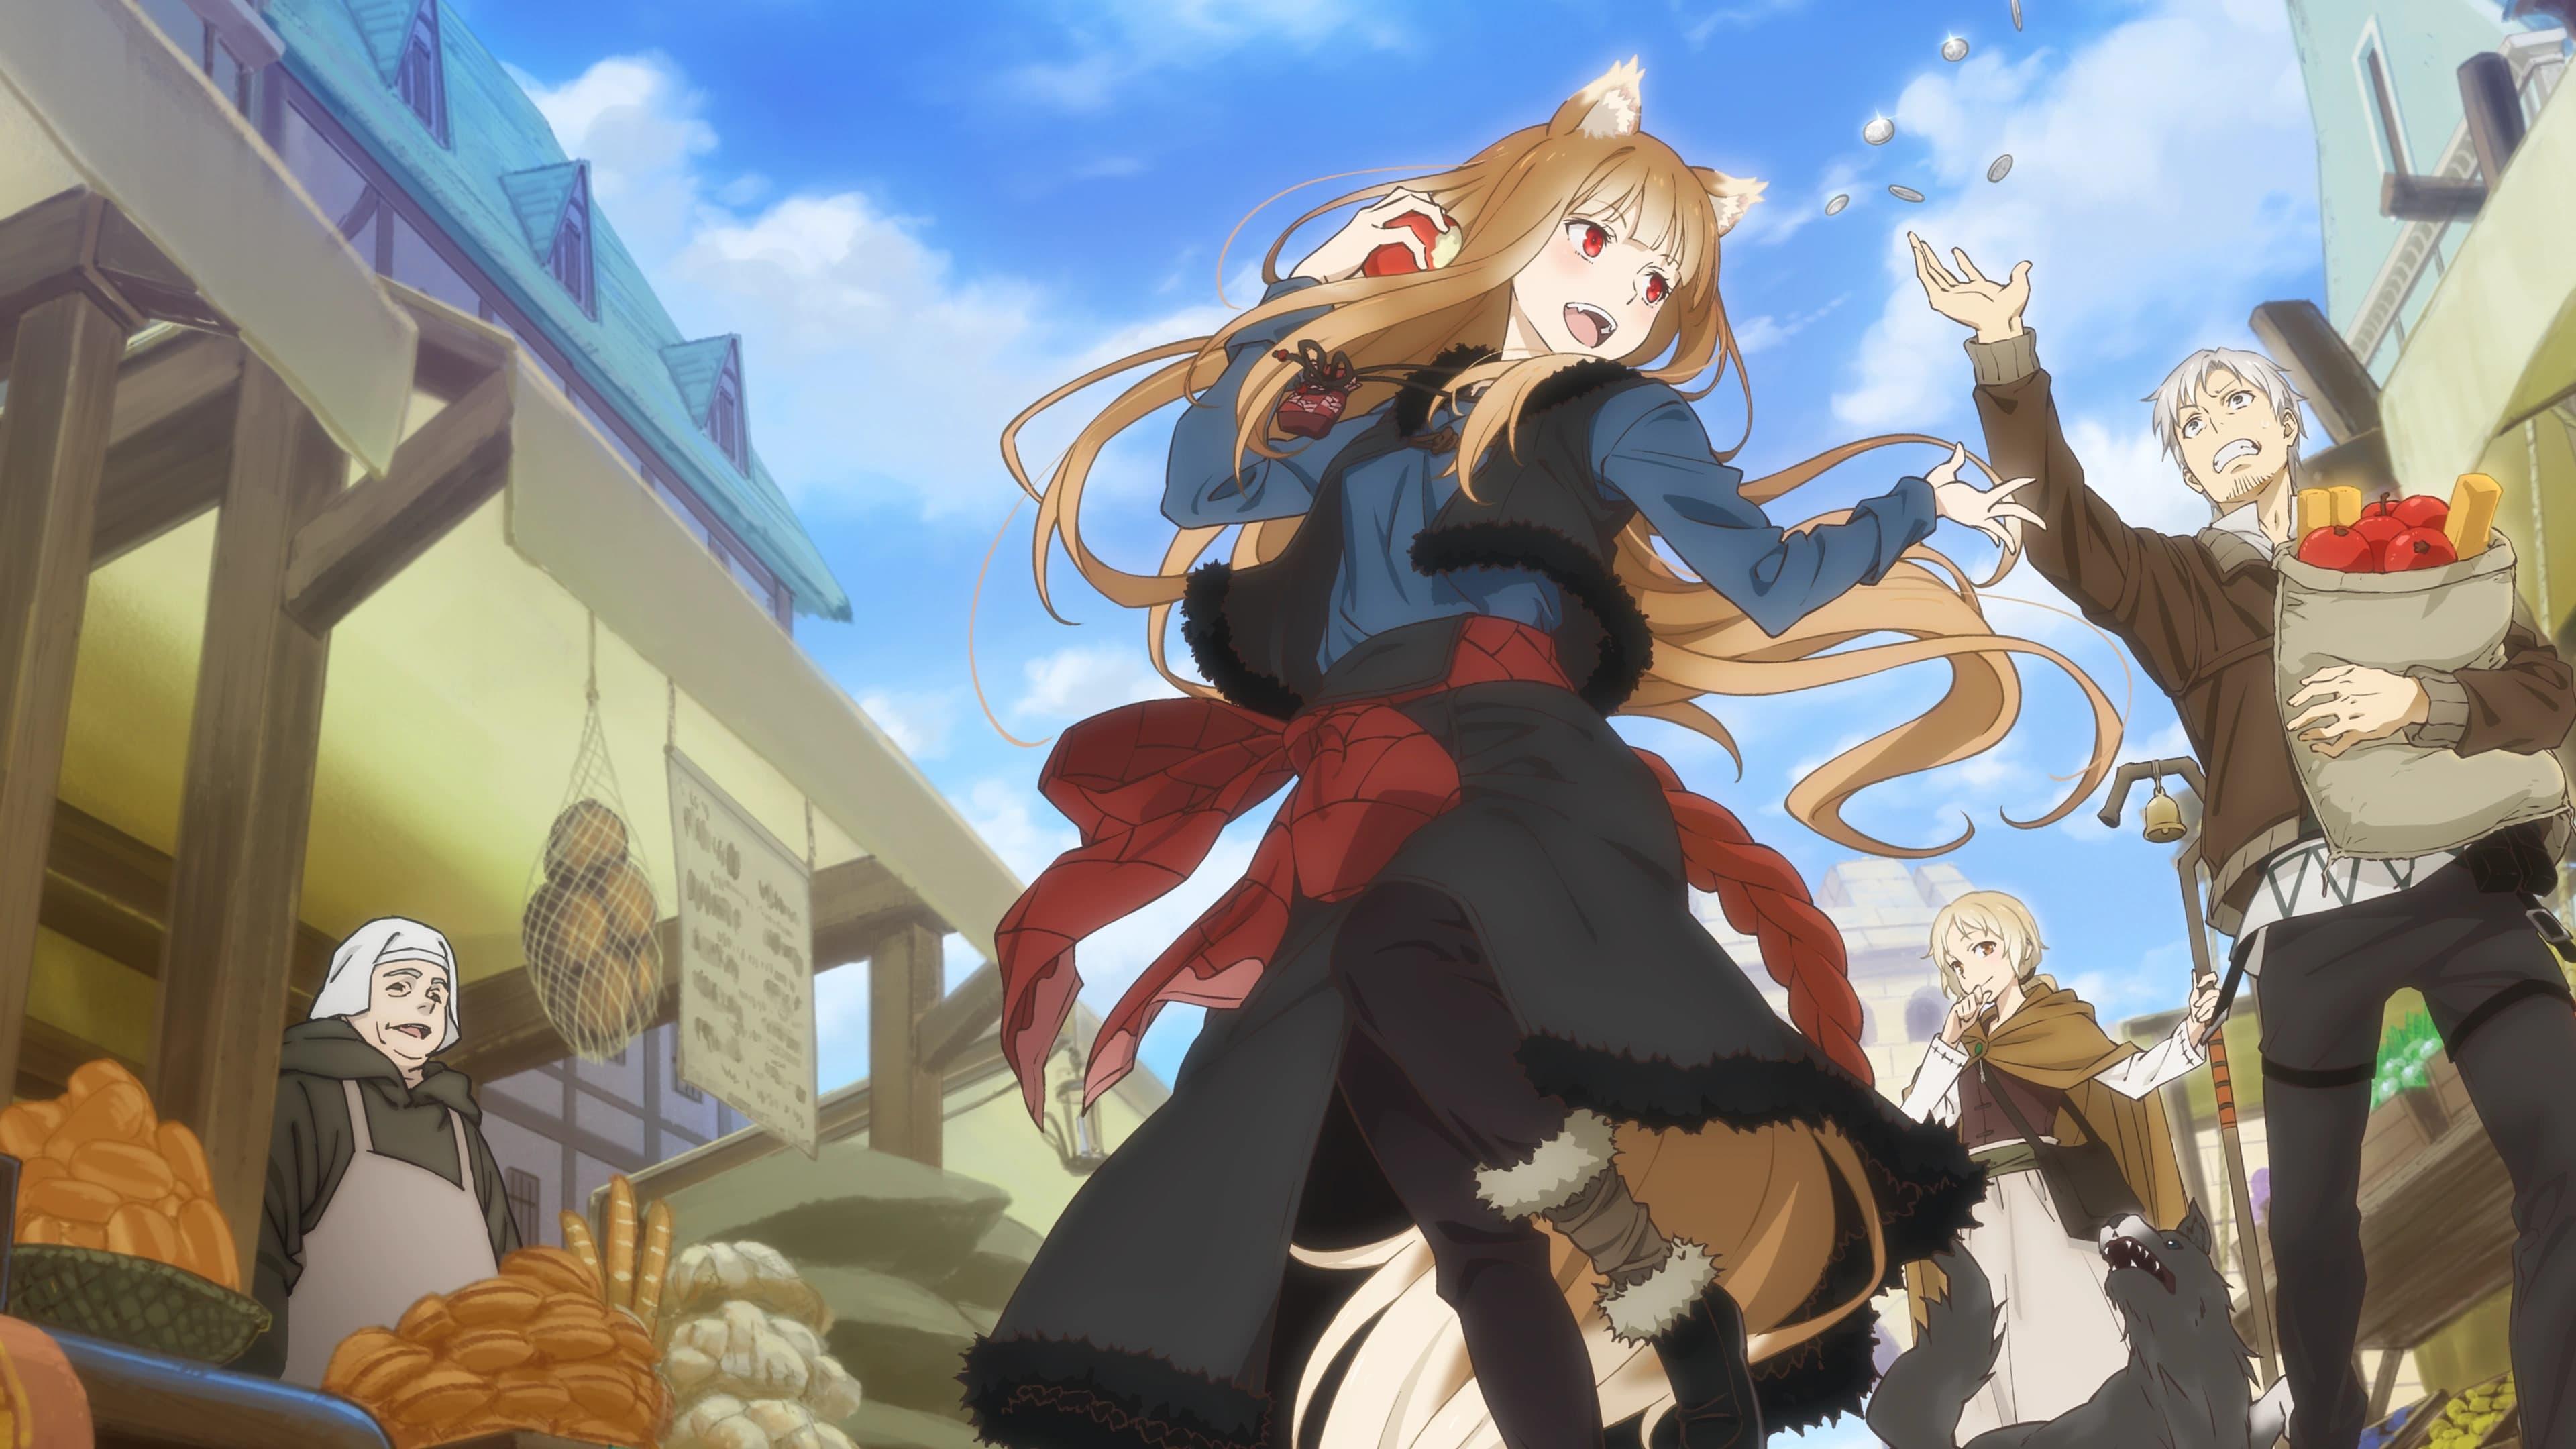 Spice and Wolf: MERCHANT MEETS THE WISE WOLF backdrop